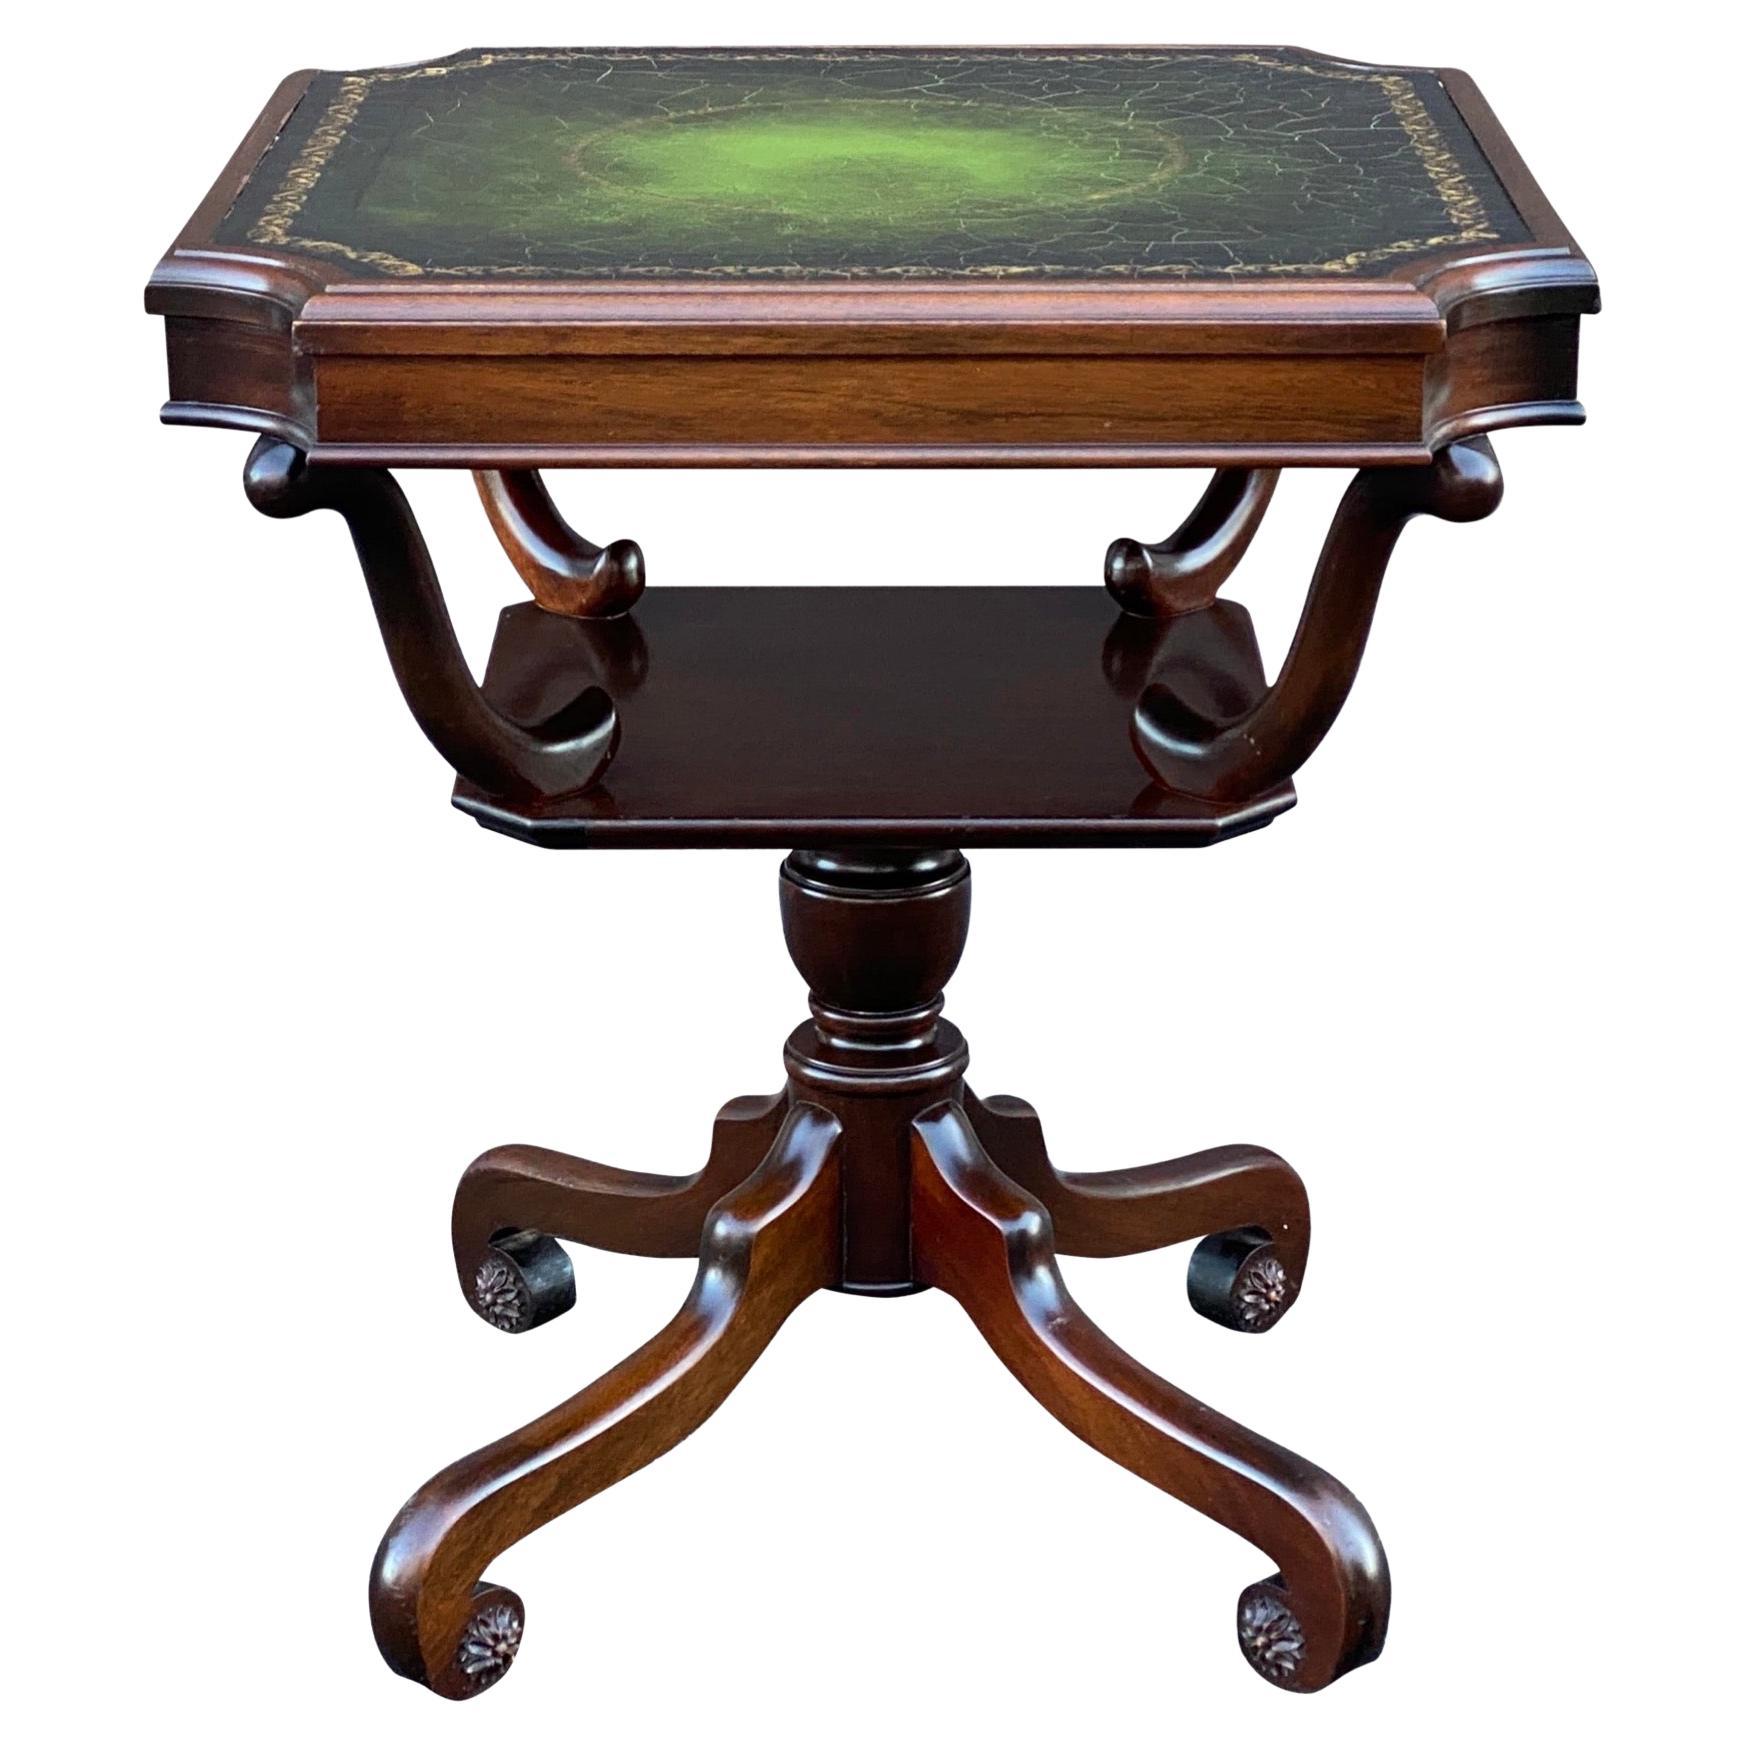 Regency Mahogany Scroll Foot Center Table With Tooled Green Leather Top